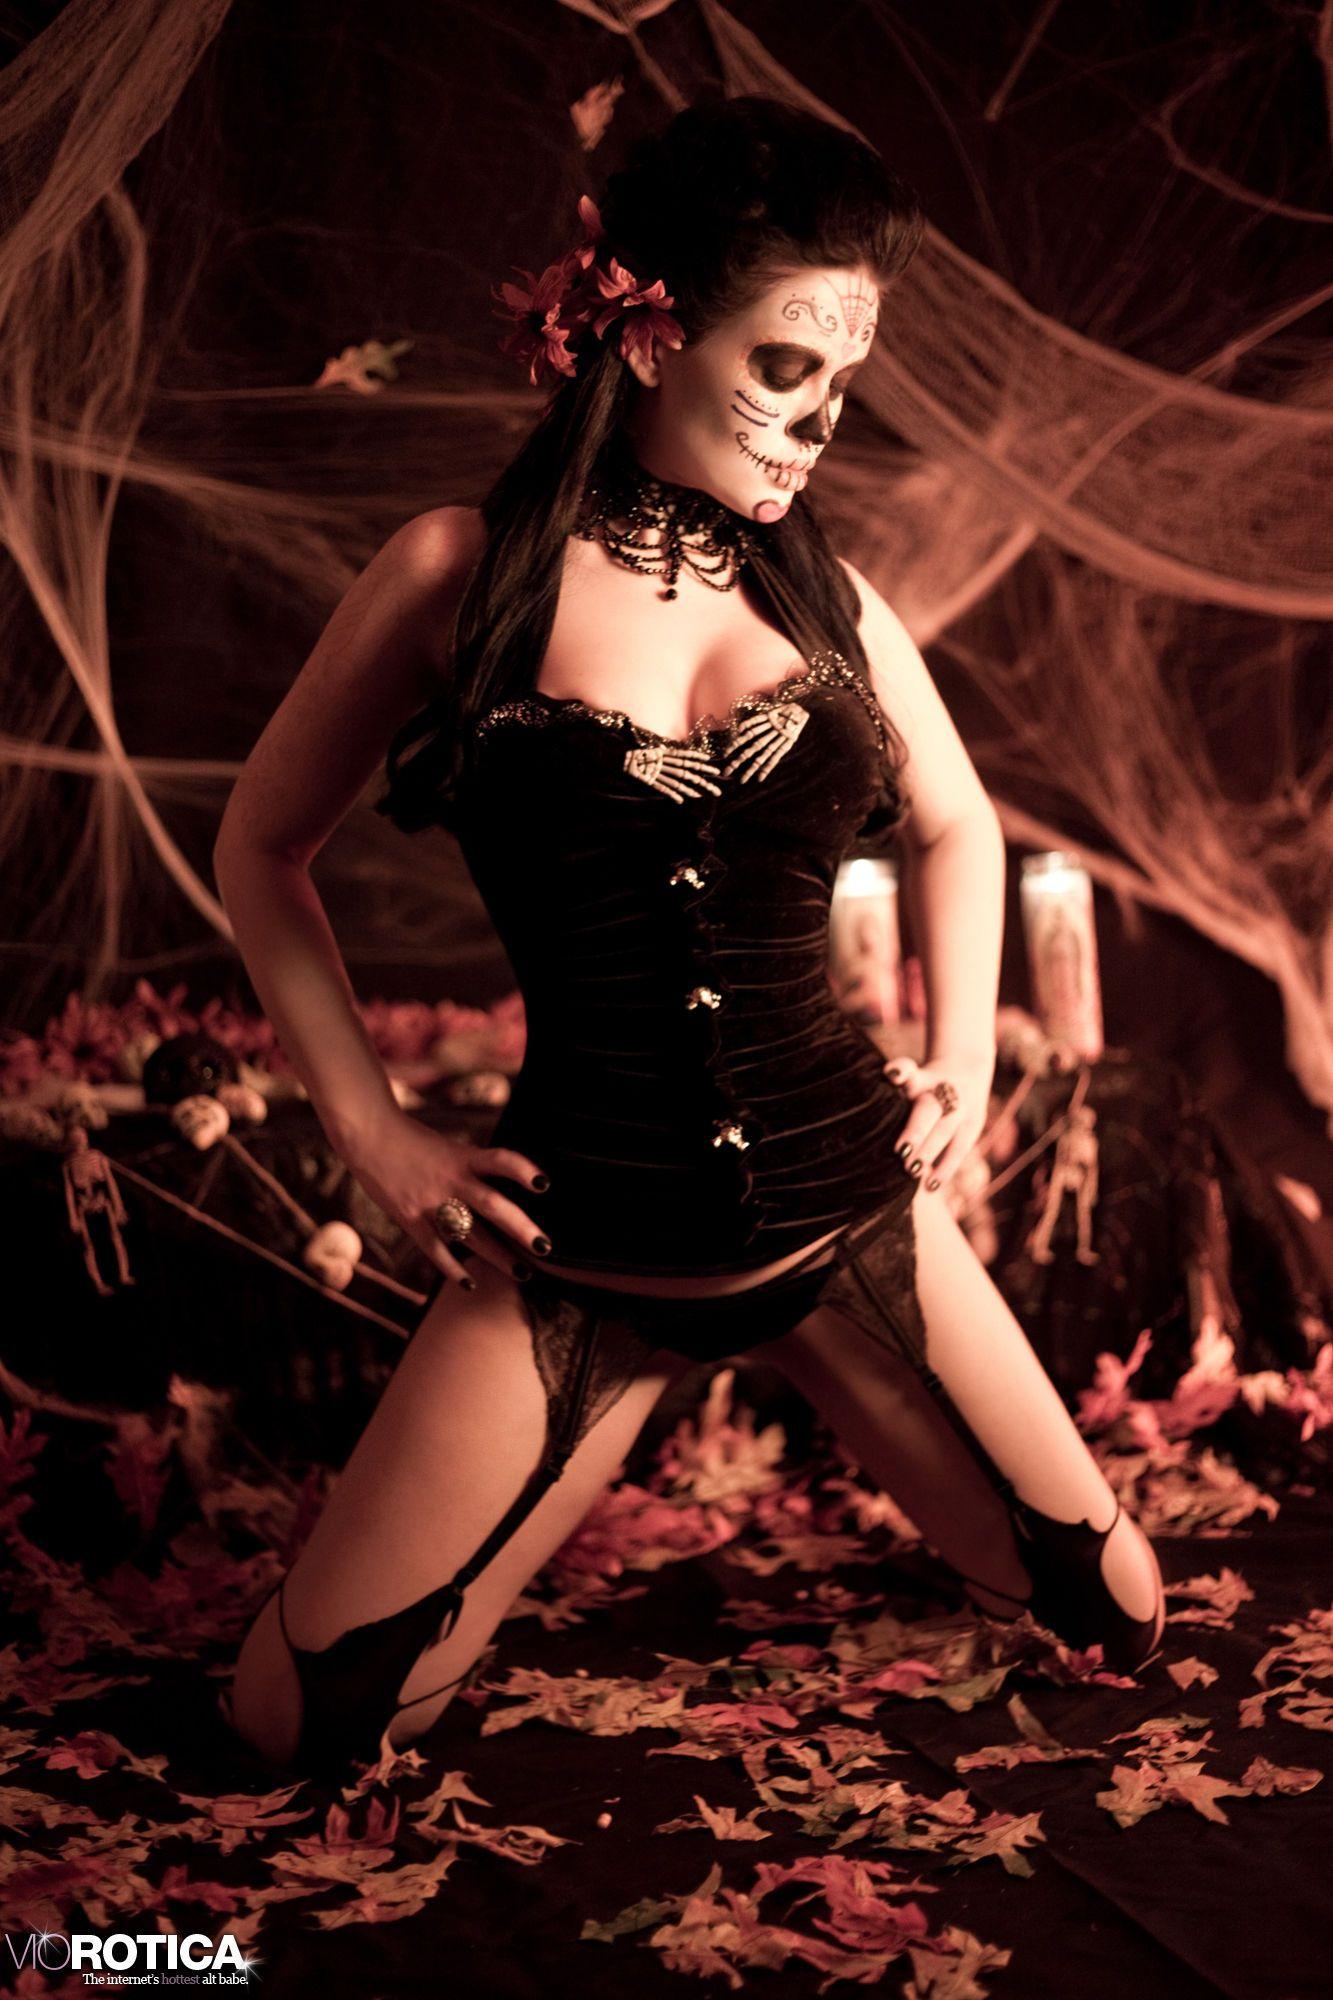 Pictures of Viorotica giving a hot gothic set #60150823